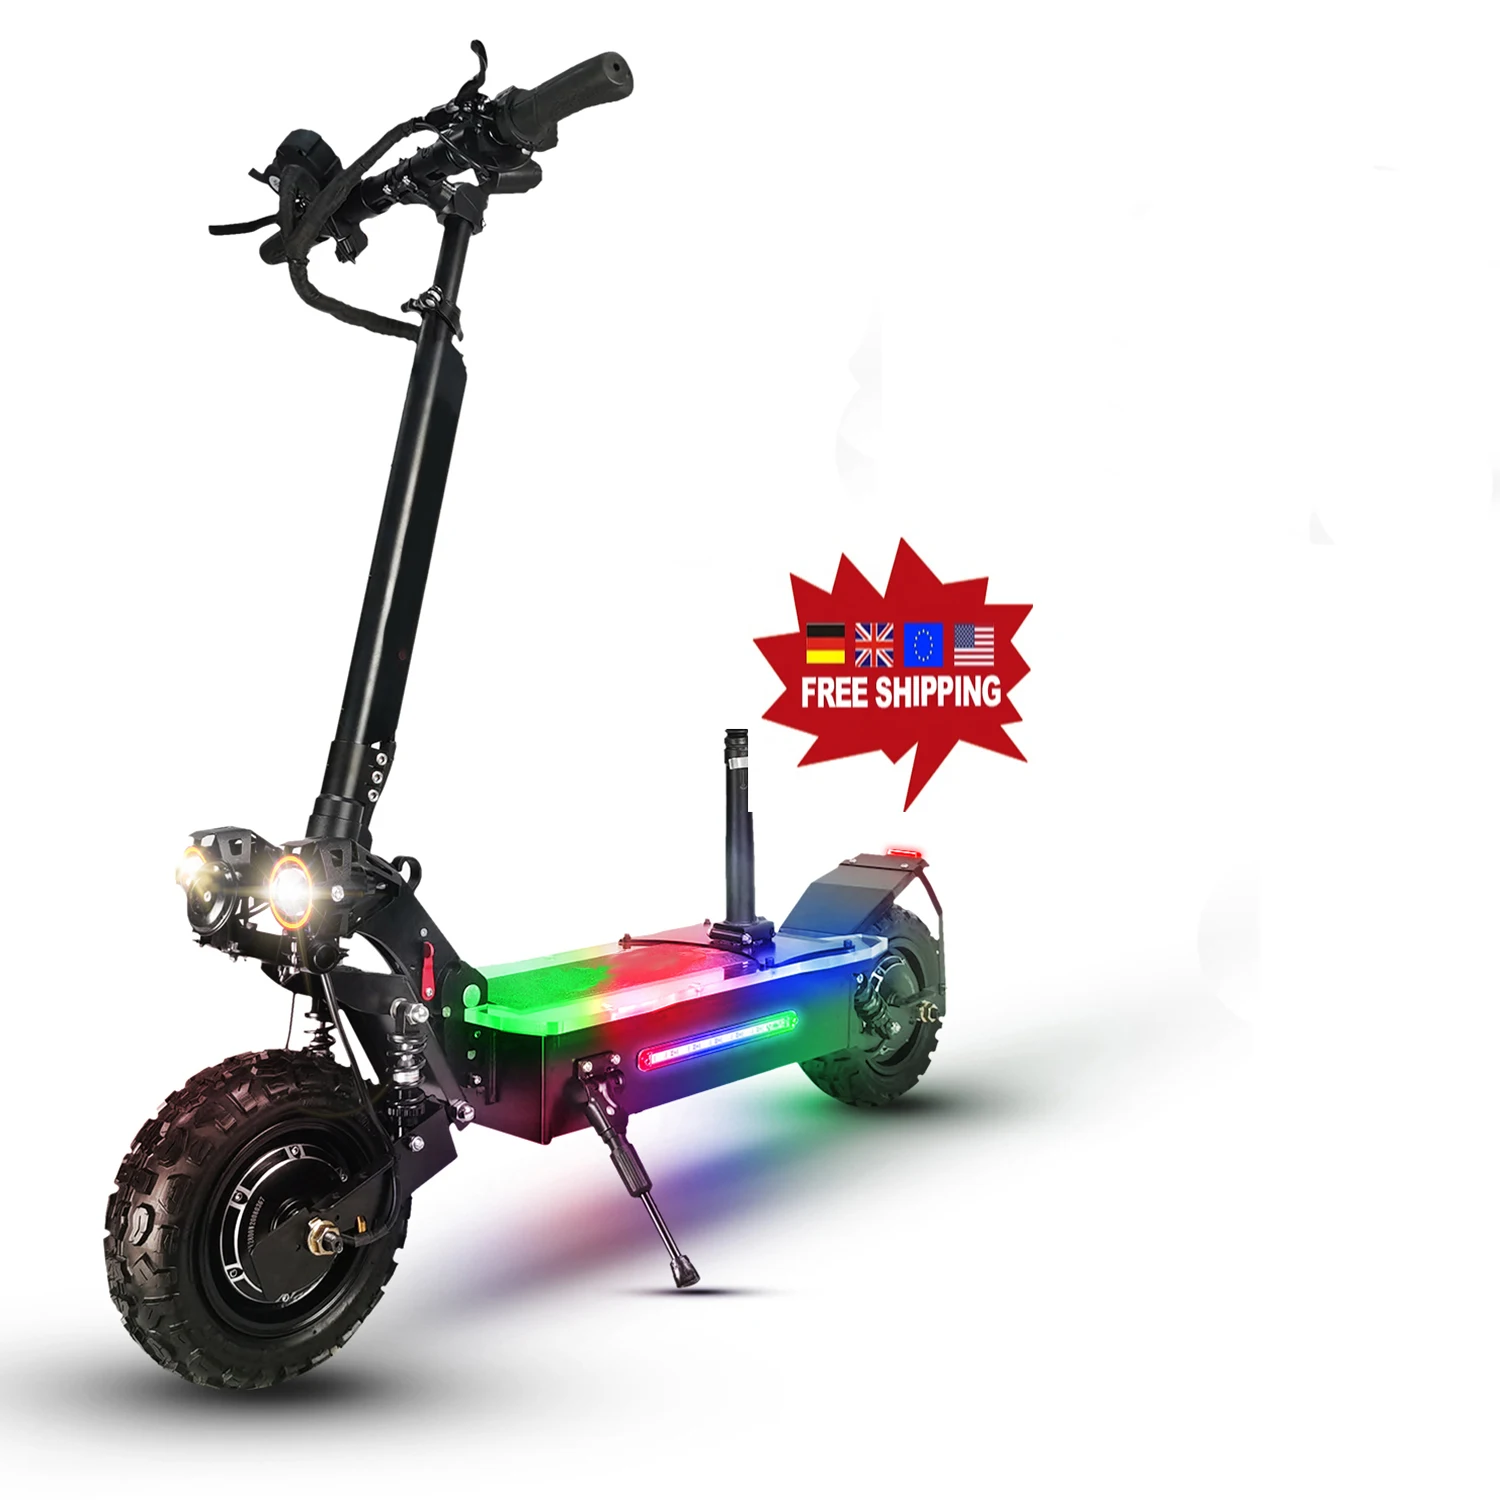 

Off Road US EU warehouse 5600w Daul Motor Folding Kick Scooter 10.5 inch Wide Wheel Adult Scooter with High Speed